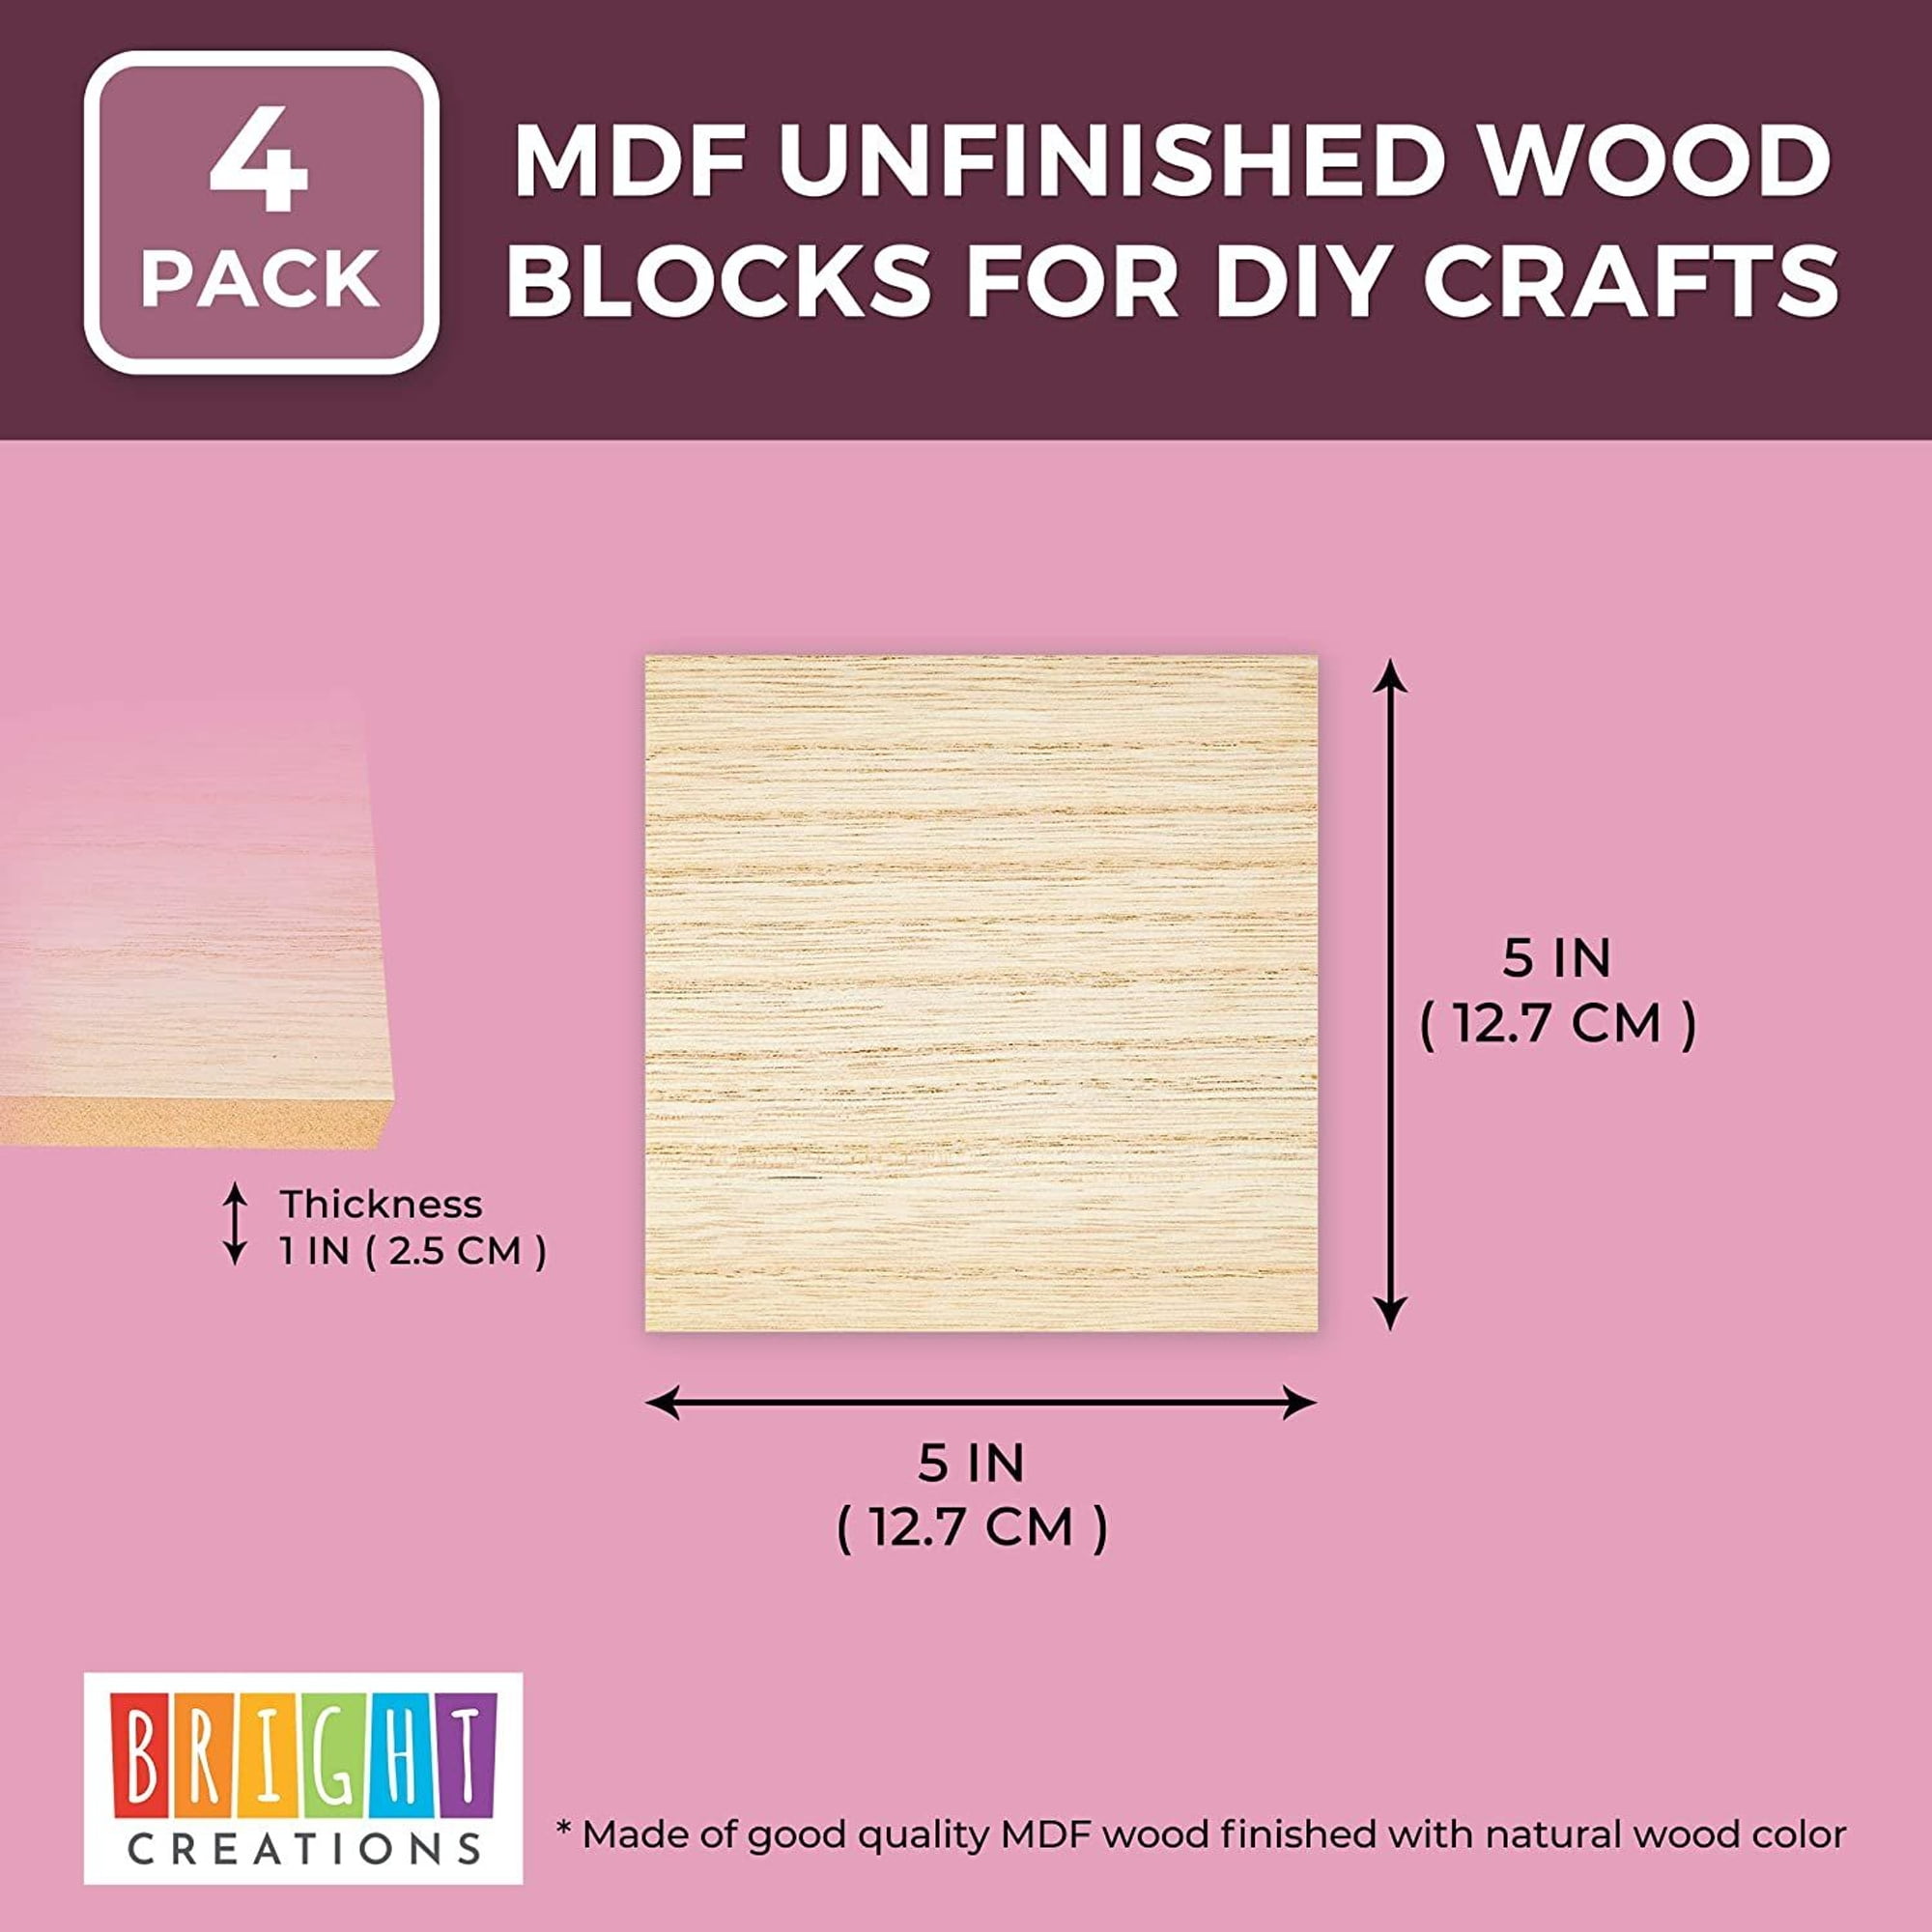 12-Pack) - 4” x 4” Wooden Blocks for Crafts - 1-Inch Thick Square